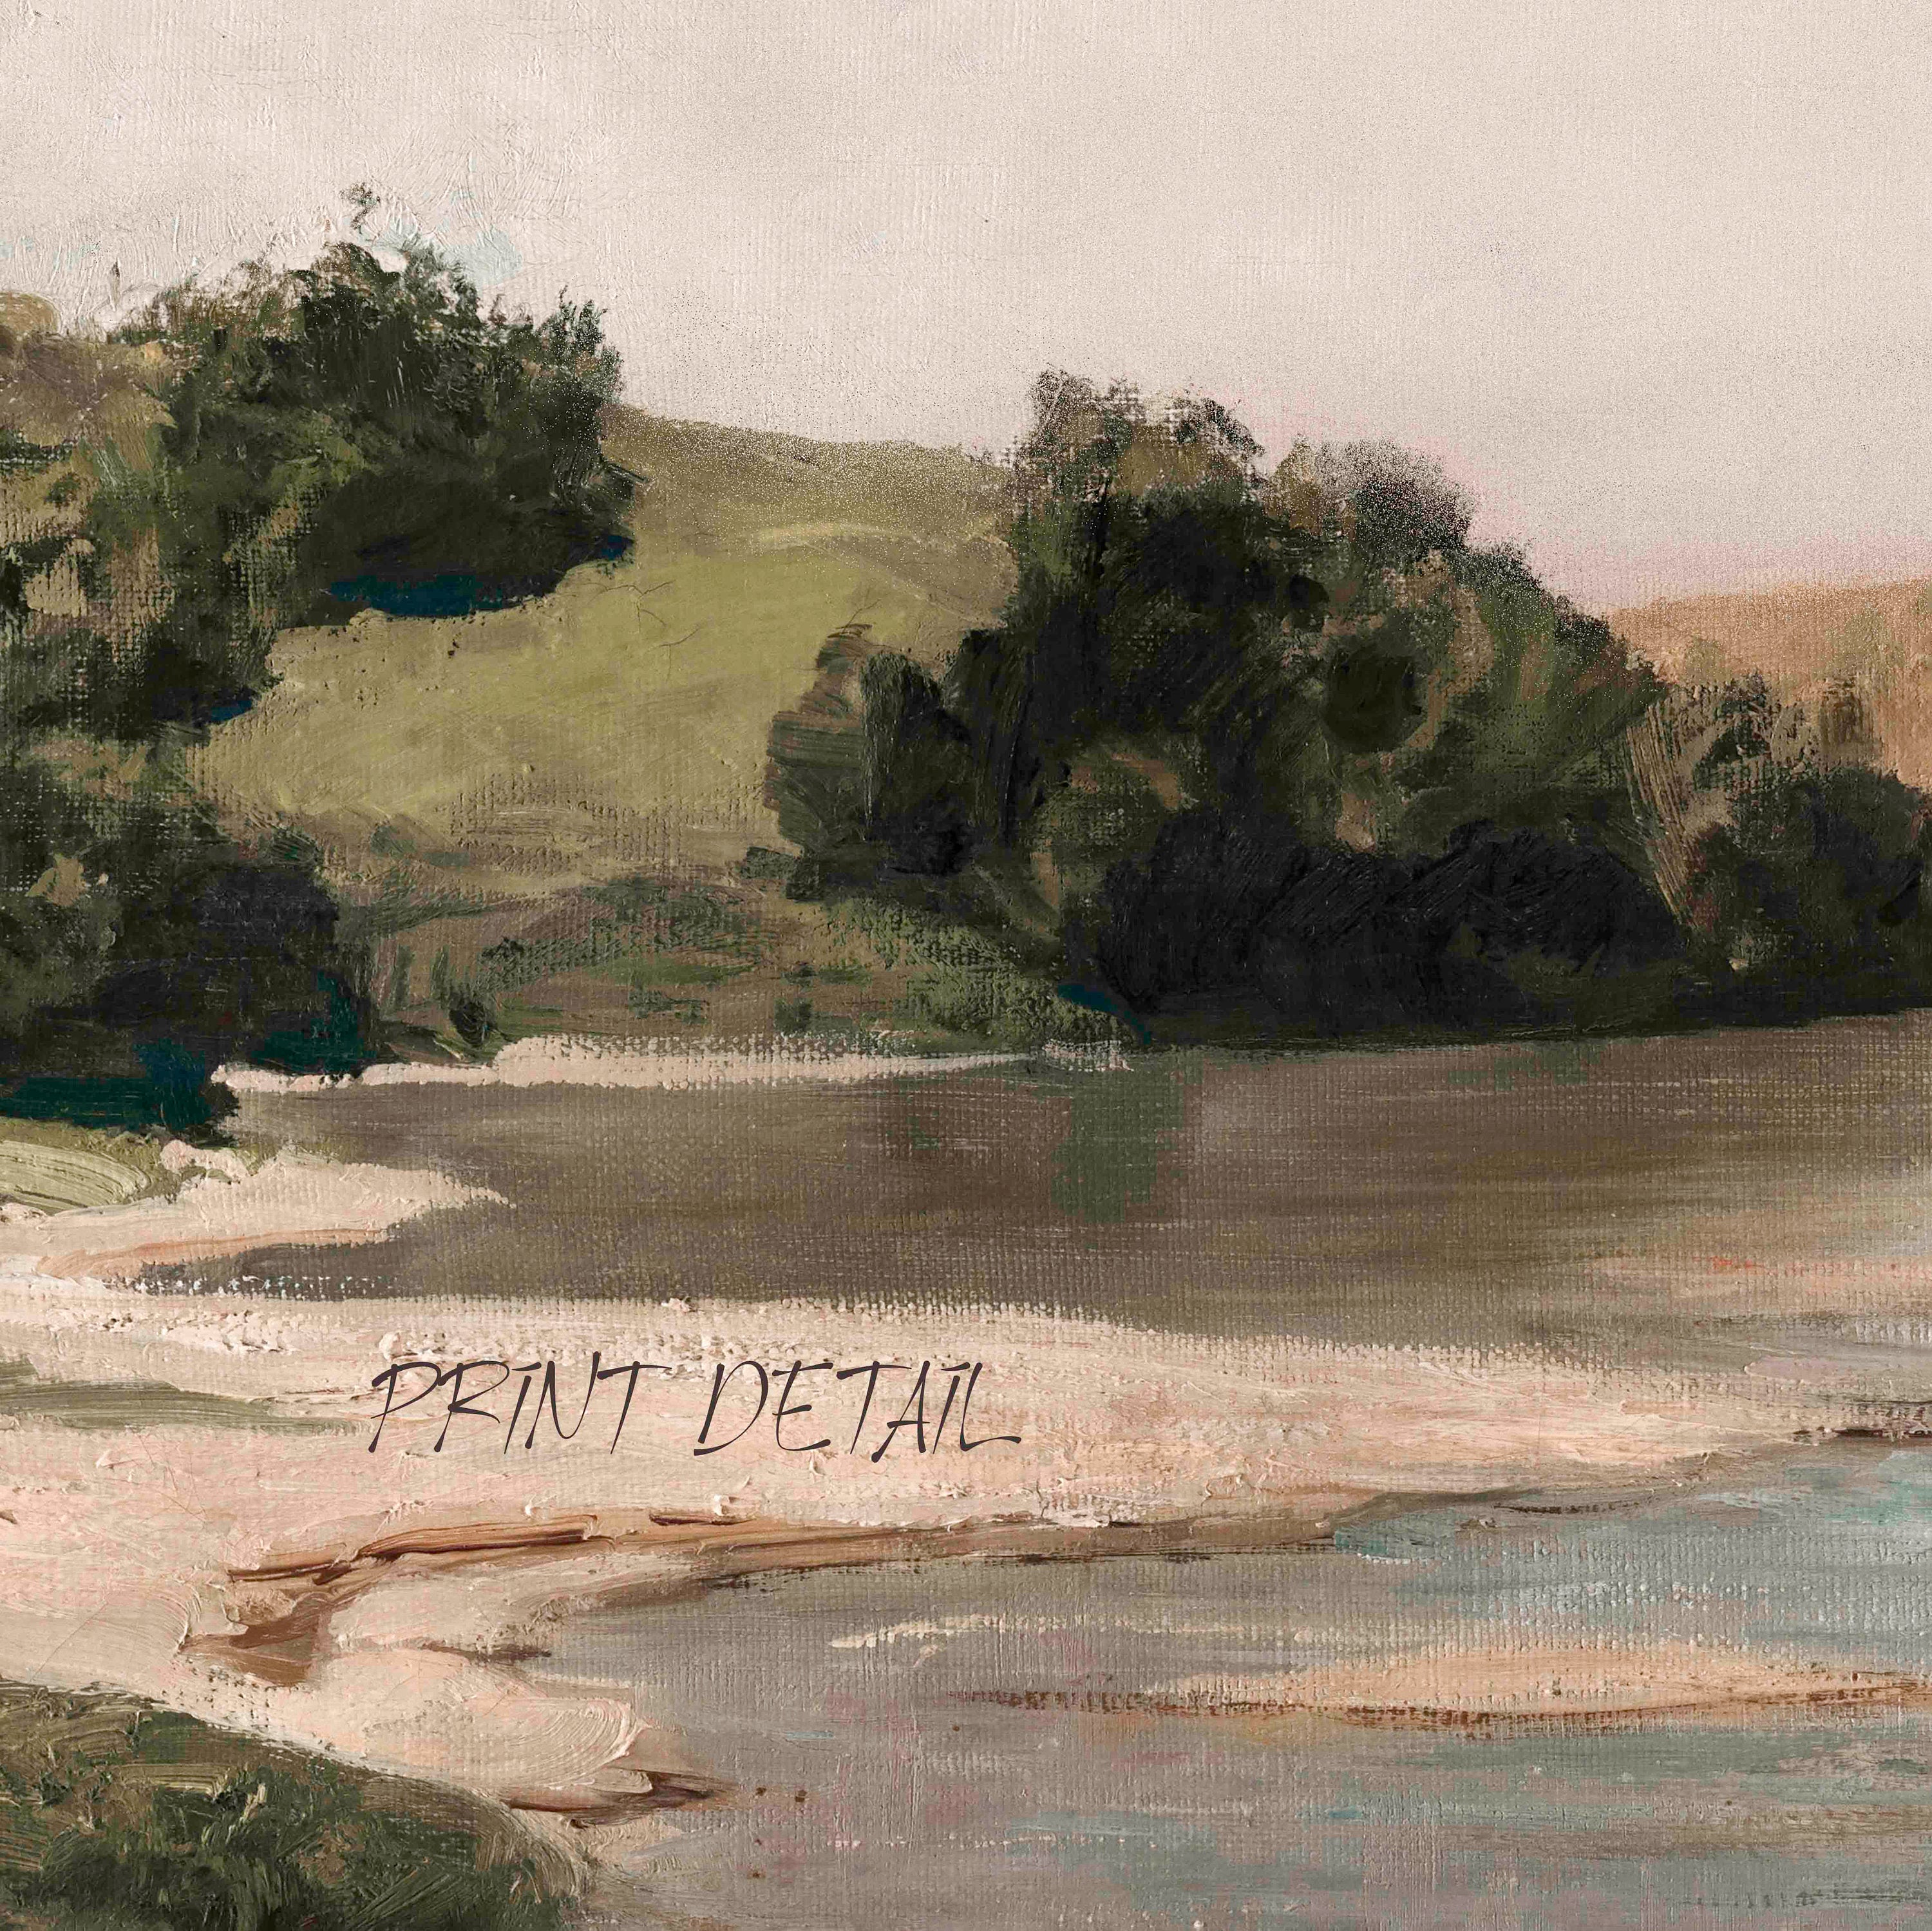 The original artwork "Oka River" was painted by the Russian painter Vasily Polenov